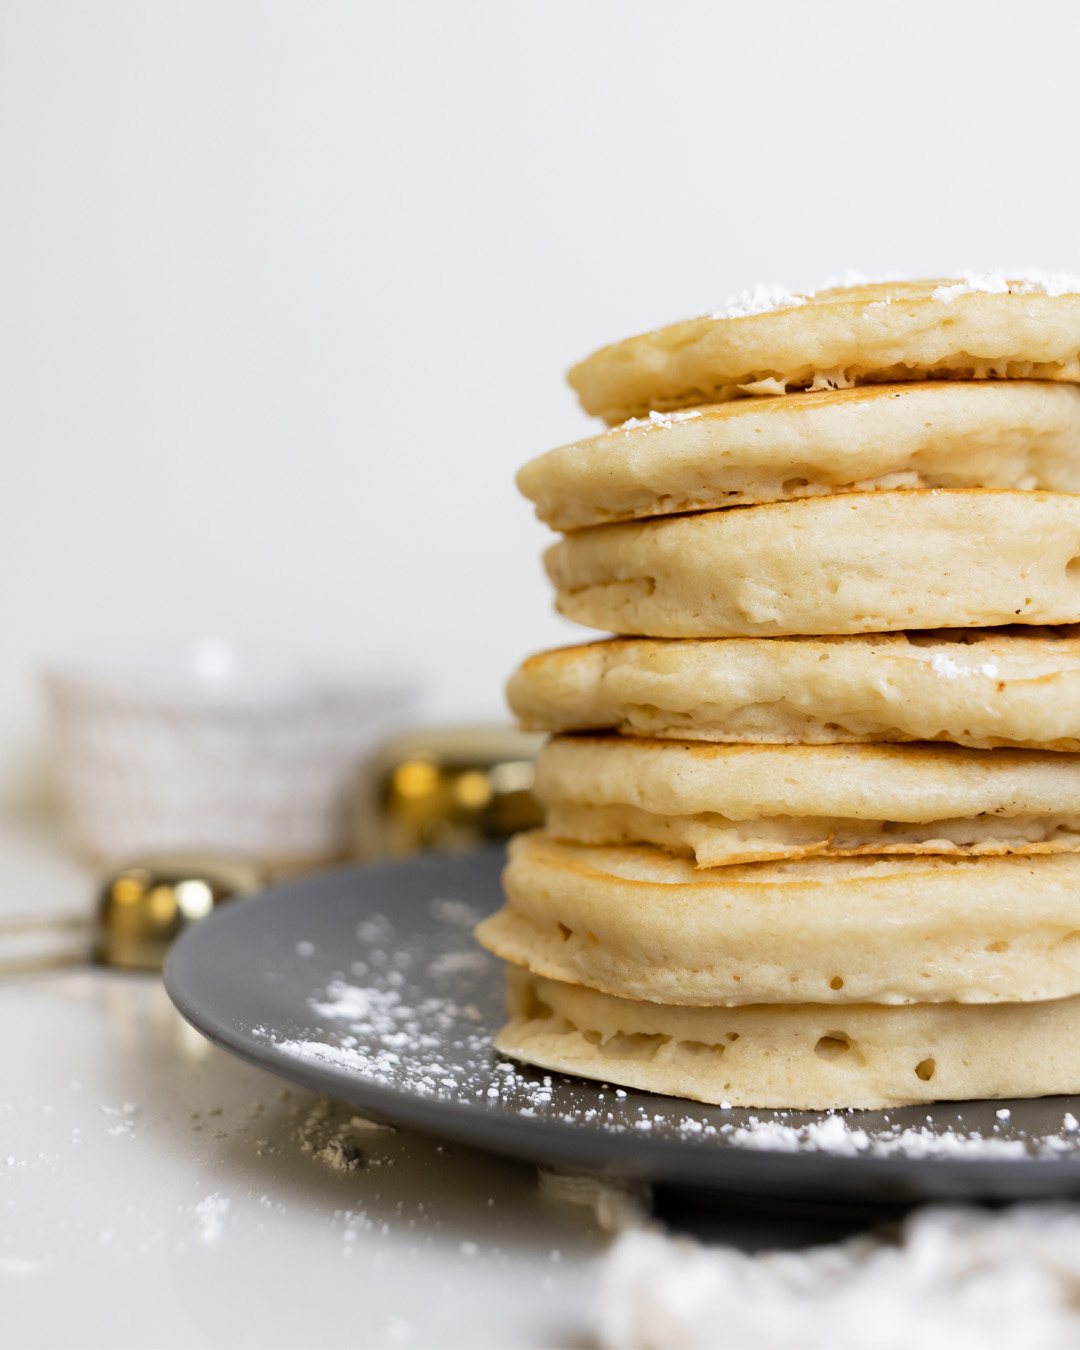 We've been really into pancakes lately in our house, so I thought I'd share our favorite plant-based pancake recipe today!